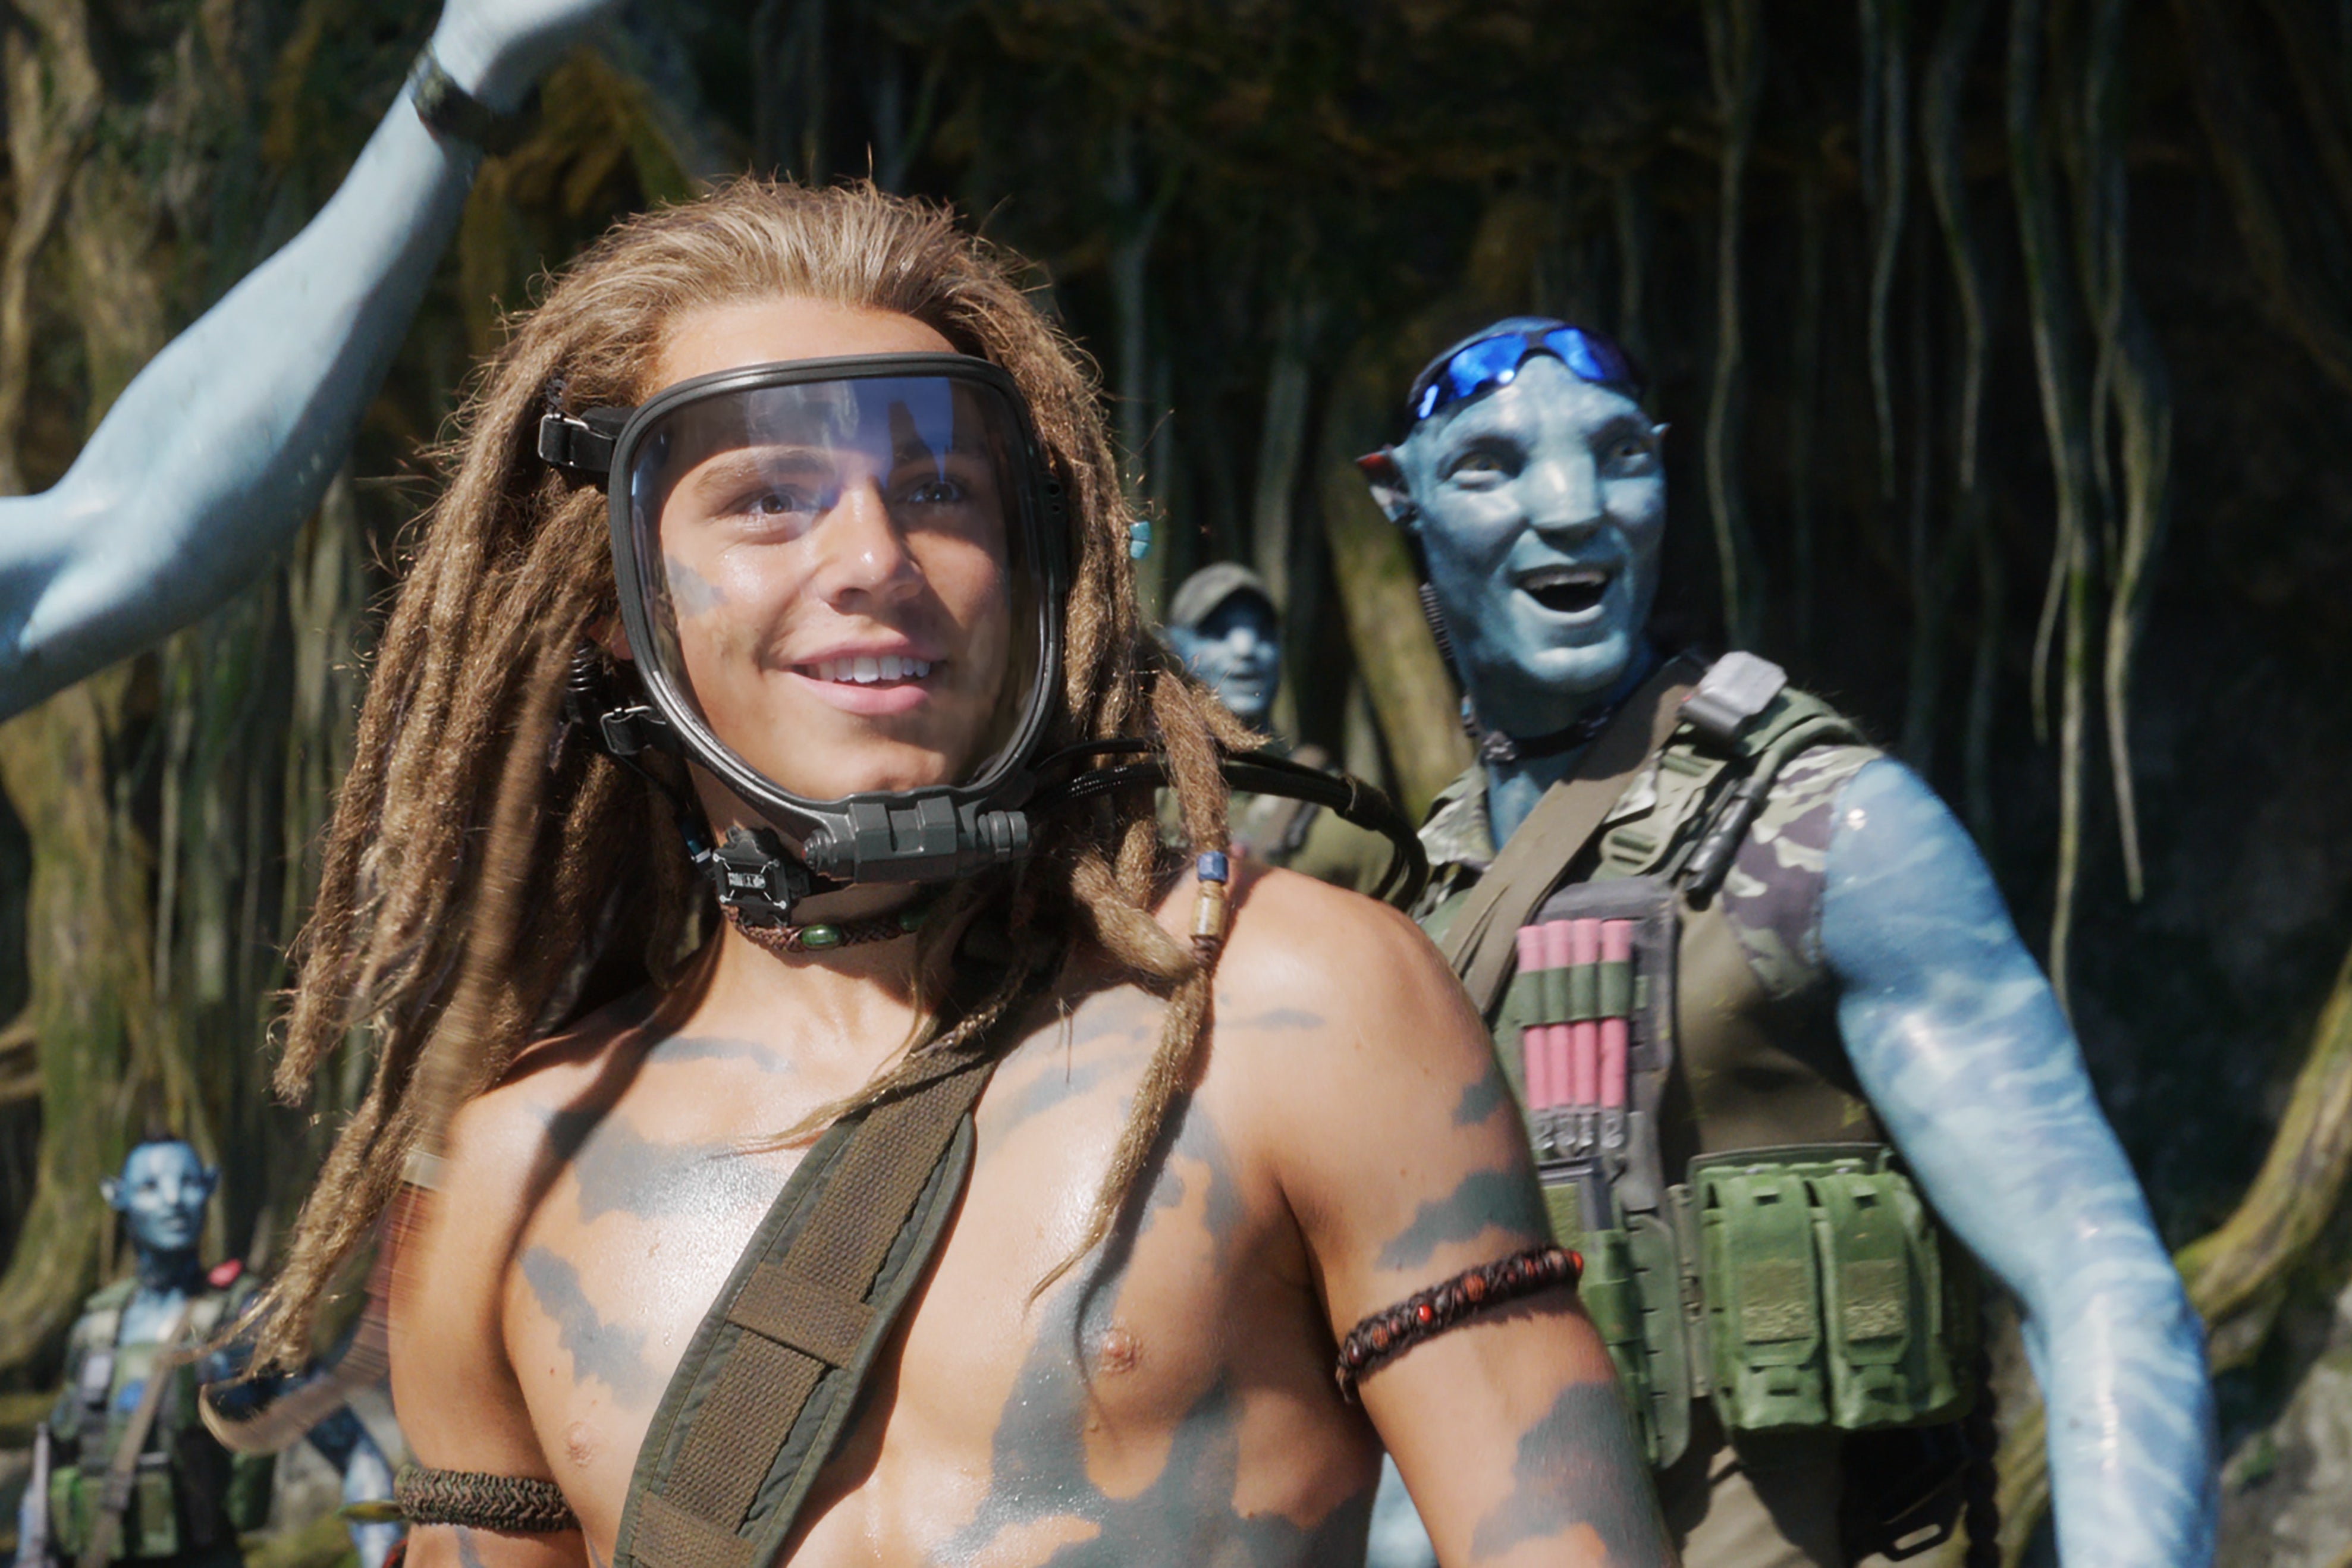 A shirtless, tattooed white guy with beads around his arms, blond dreads on his head, and a face-covering gas mask, looks on in awe, as blue cat people in camo gasp and smile behind him